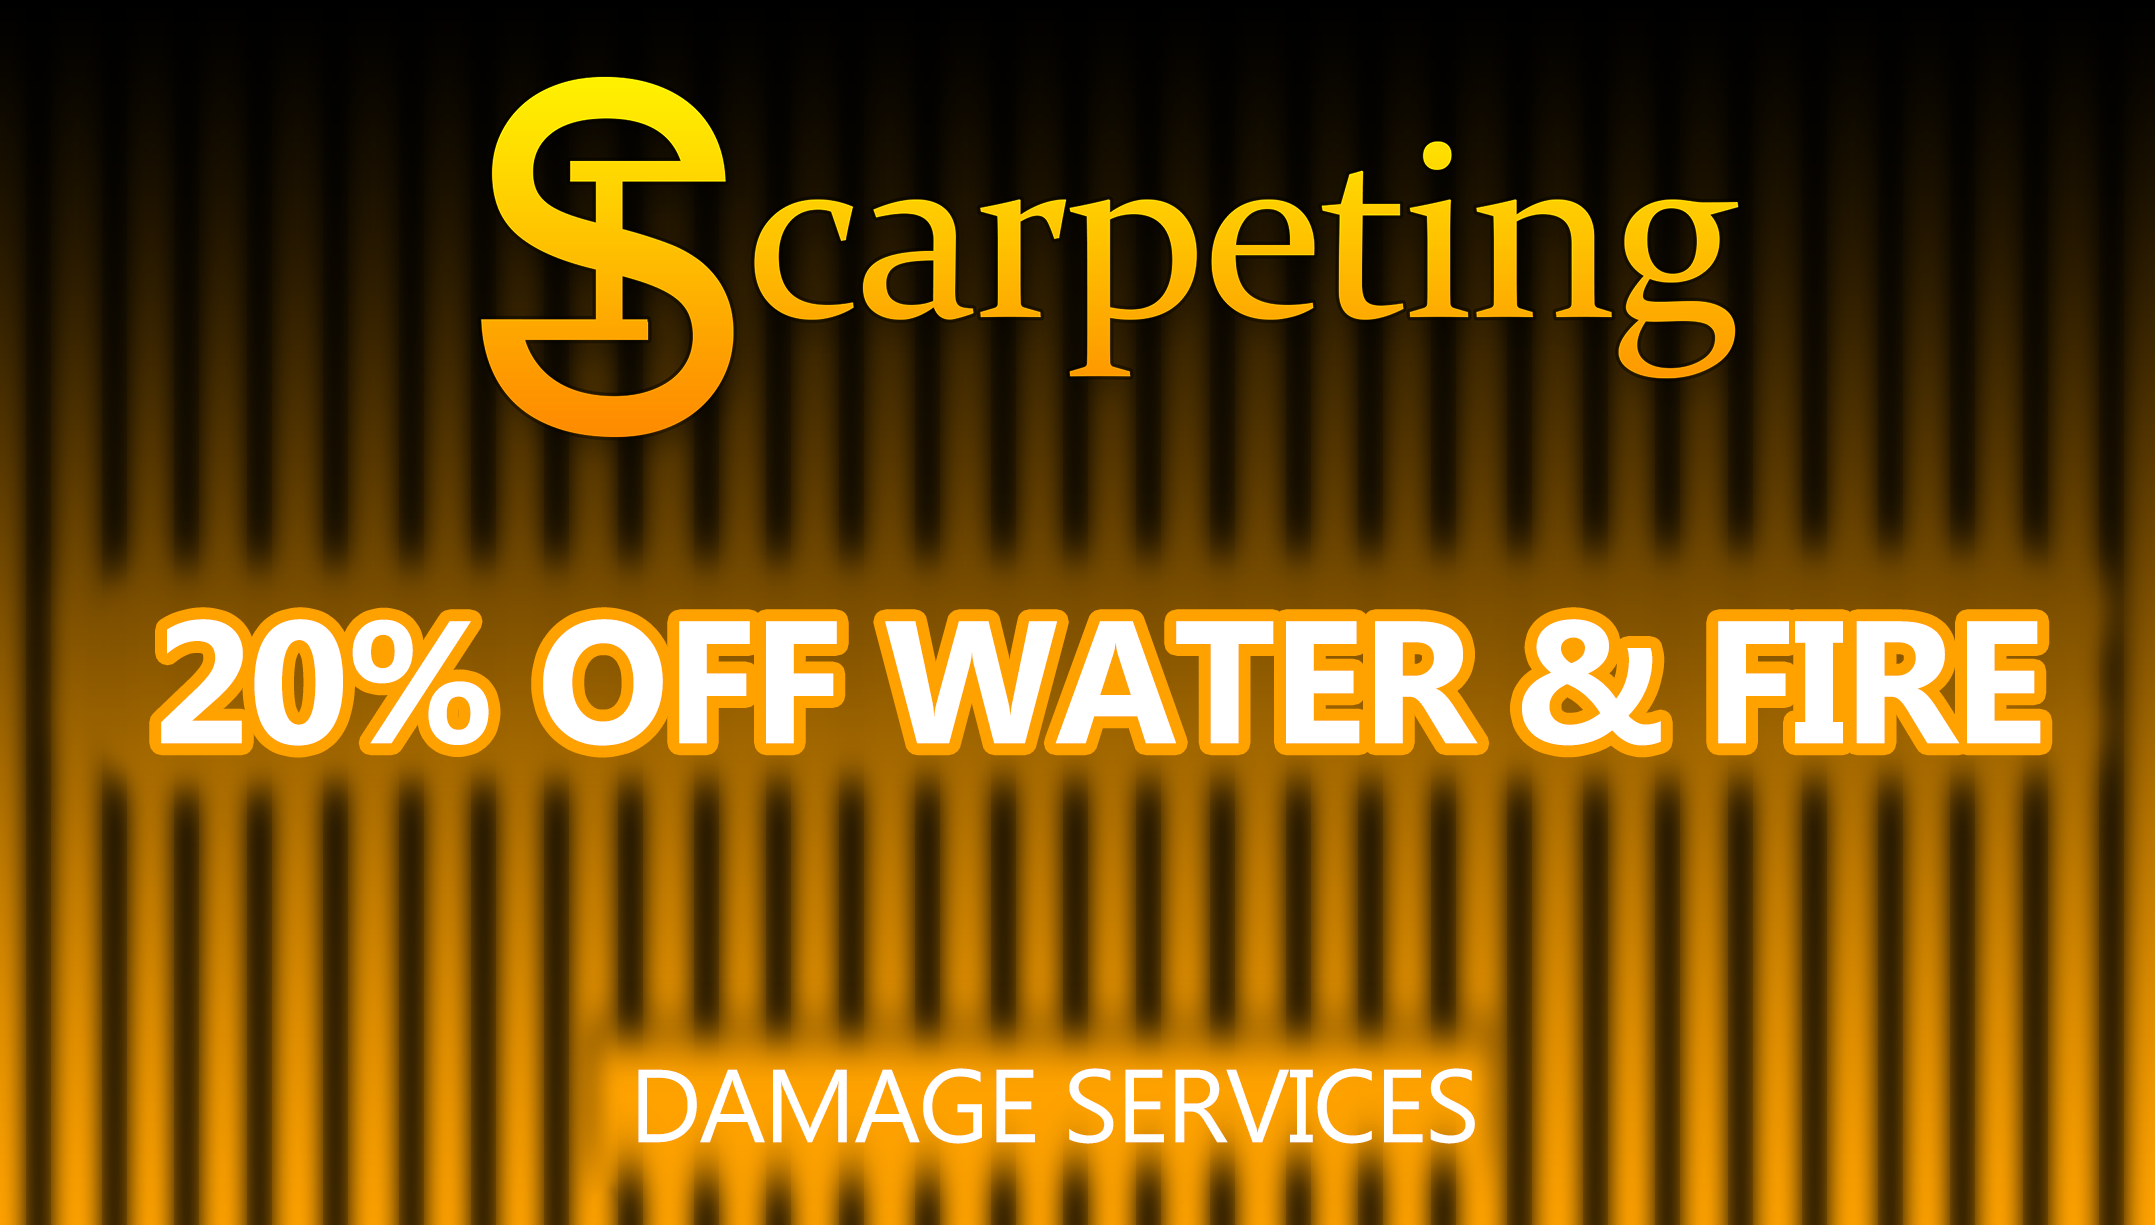 Water or Fire Damage Services 20 PERCENT OFF